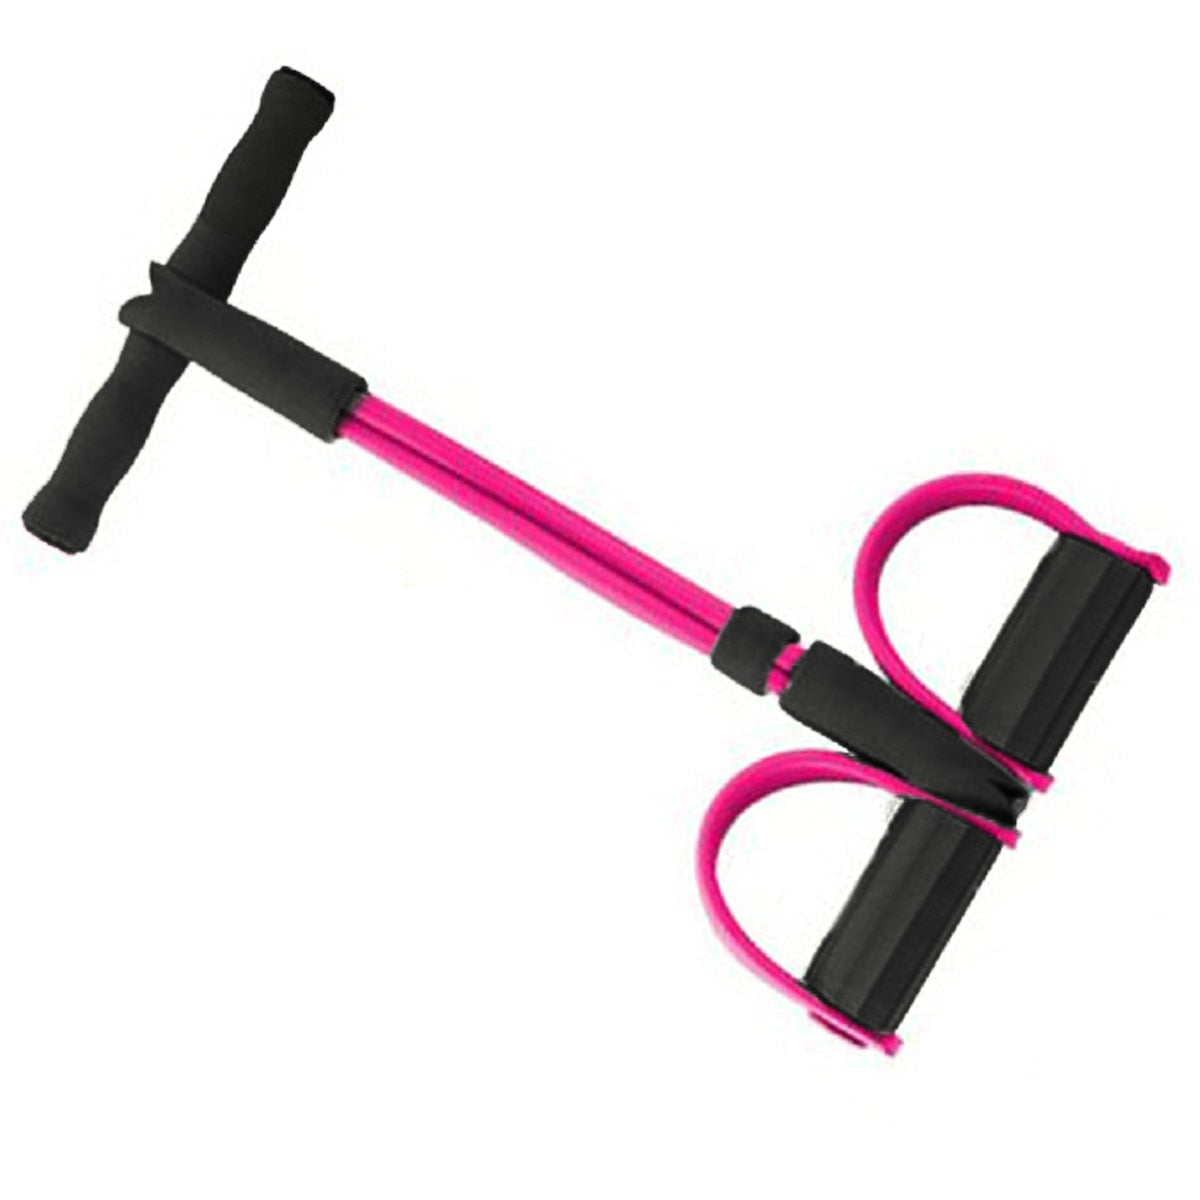 Pull Rope Resistance Band in Pink - Thefitnesshut.com